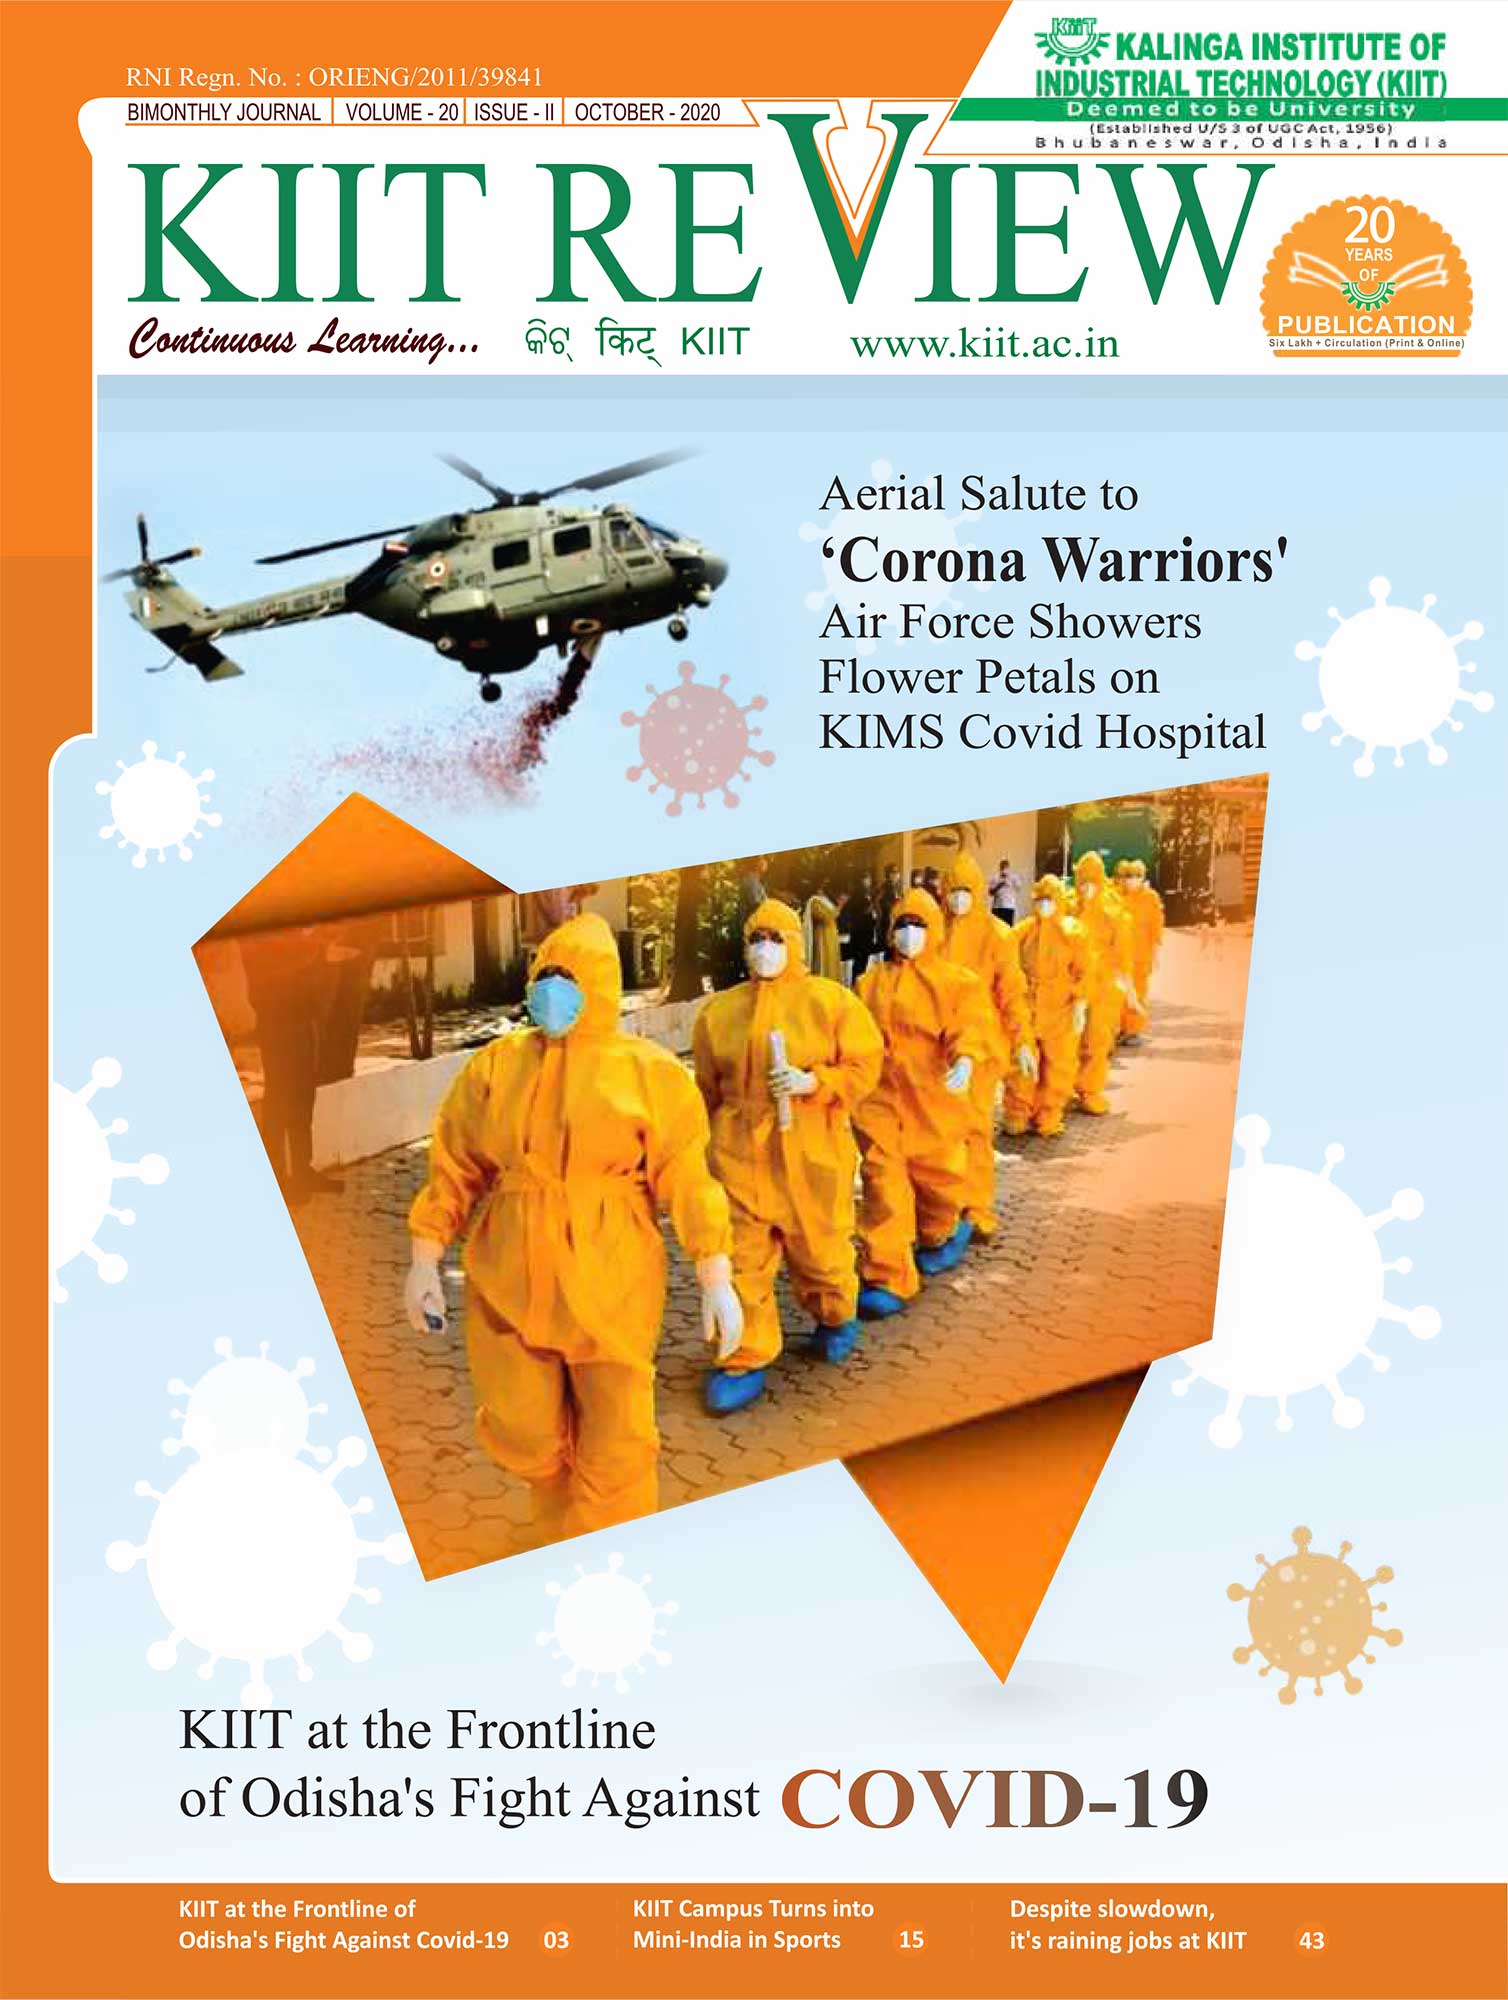 KIIT Review Magazine October 2020 Issue